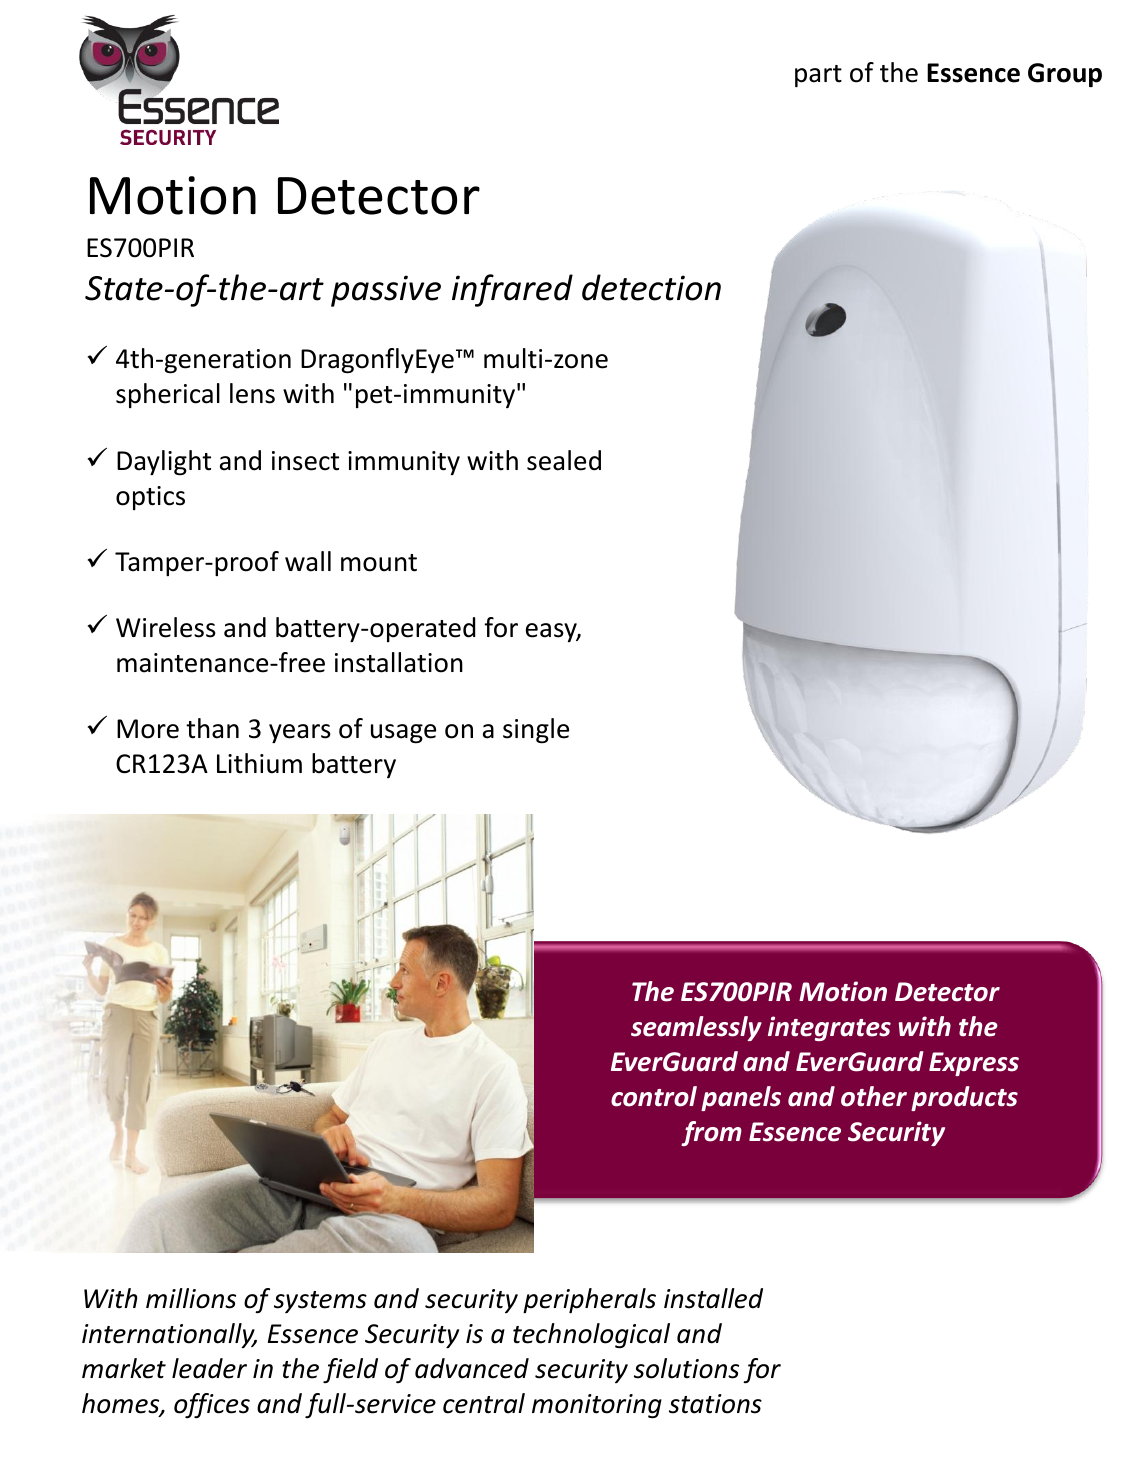 Motion Detector ES700PIR State-of-the-art passive infrared detection 4th-generation DragonflyEye™ multi-zone spherical lens with &quot;pet-immunity&quot; Daylight and insect immunity with sealed optics Tamper-proof wall mount  Wireless and battery-operated for easy, maintenance-free installation More than 3 years of usage on a single CR123A Lithium battery   With millions of systems and security peripherals installed internationally, Essence Security is a technological and market leader in the field of advanced security solutions for homes, offices and full-service central monitoring stations The ES700PIR Motion Detector  seamlessly integrates with the EverGuard and EverGuard Express control panels and other products from Essence Security part of the Essence Group 